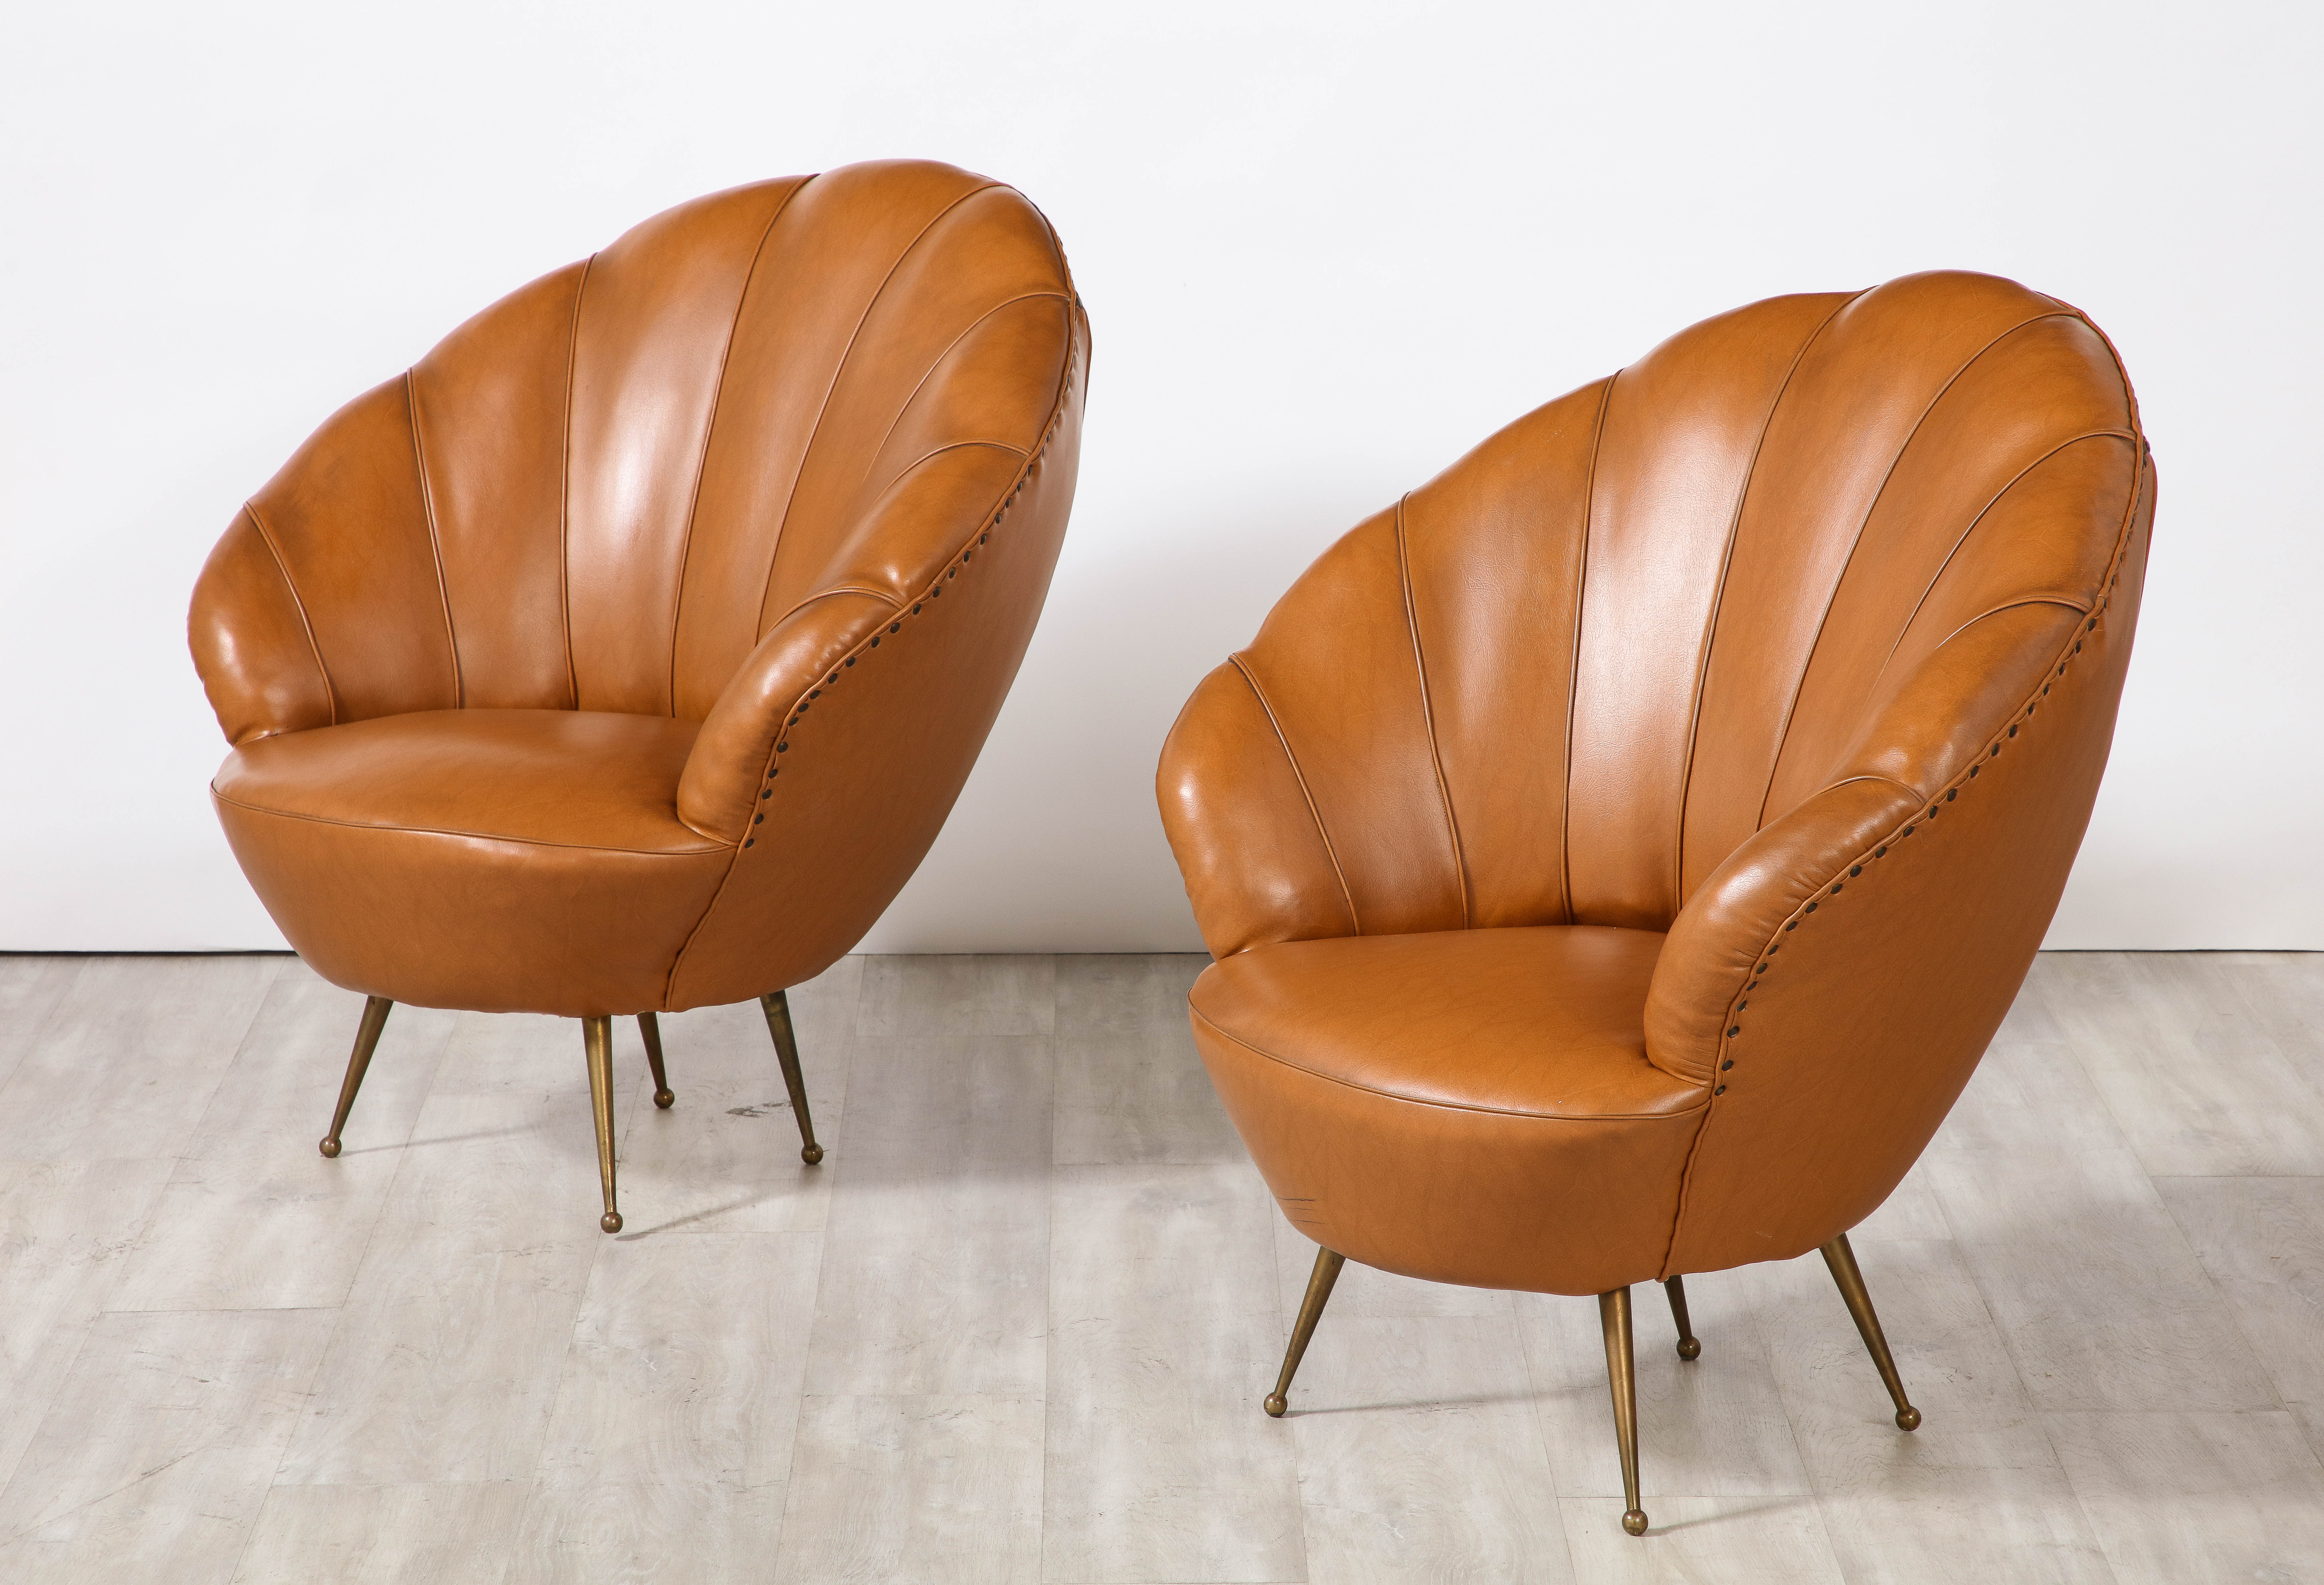 A charming and whimsical pair of Italian 1950's leather lounge chairs with scalloped shaped wide back rests, the rich cognac leather contrasts with the nail head trim and elegantly splayed brass legs. 
Italy, circa 1950.
Size: 34